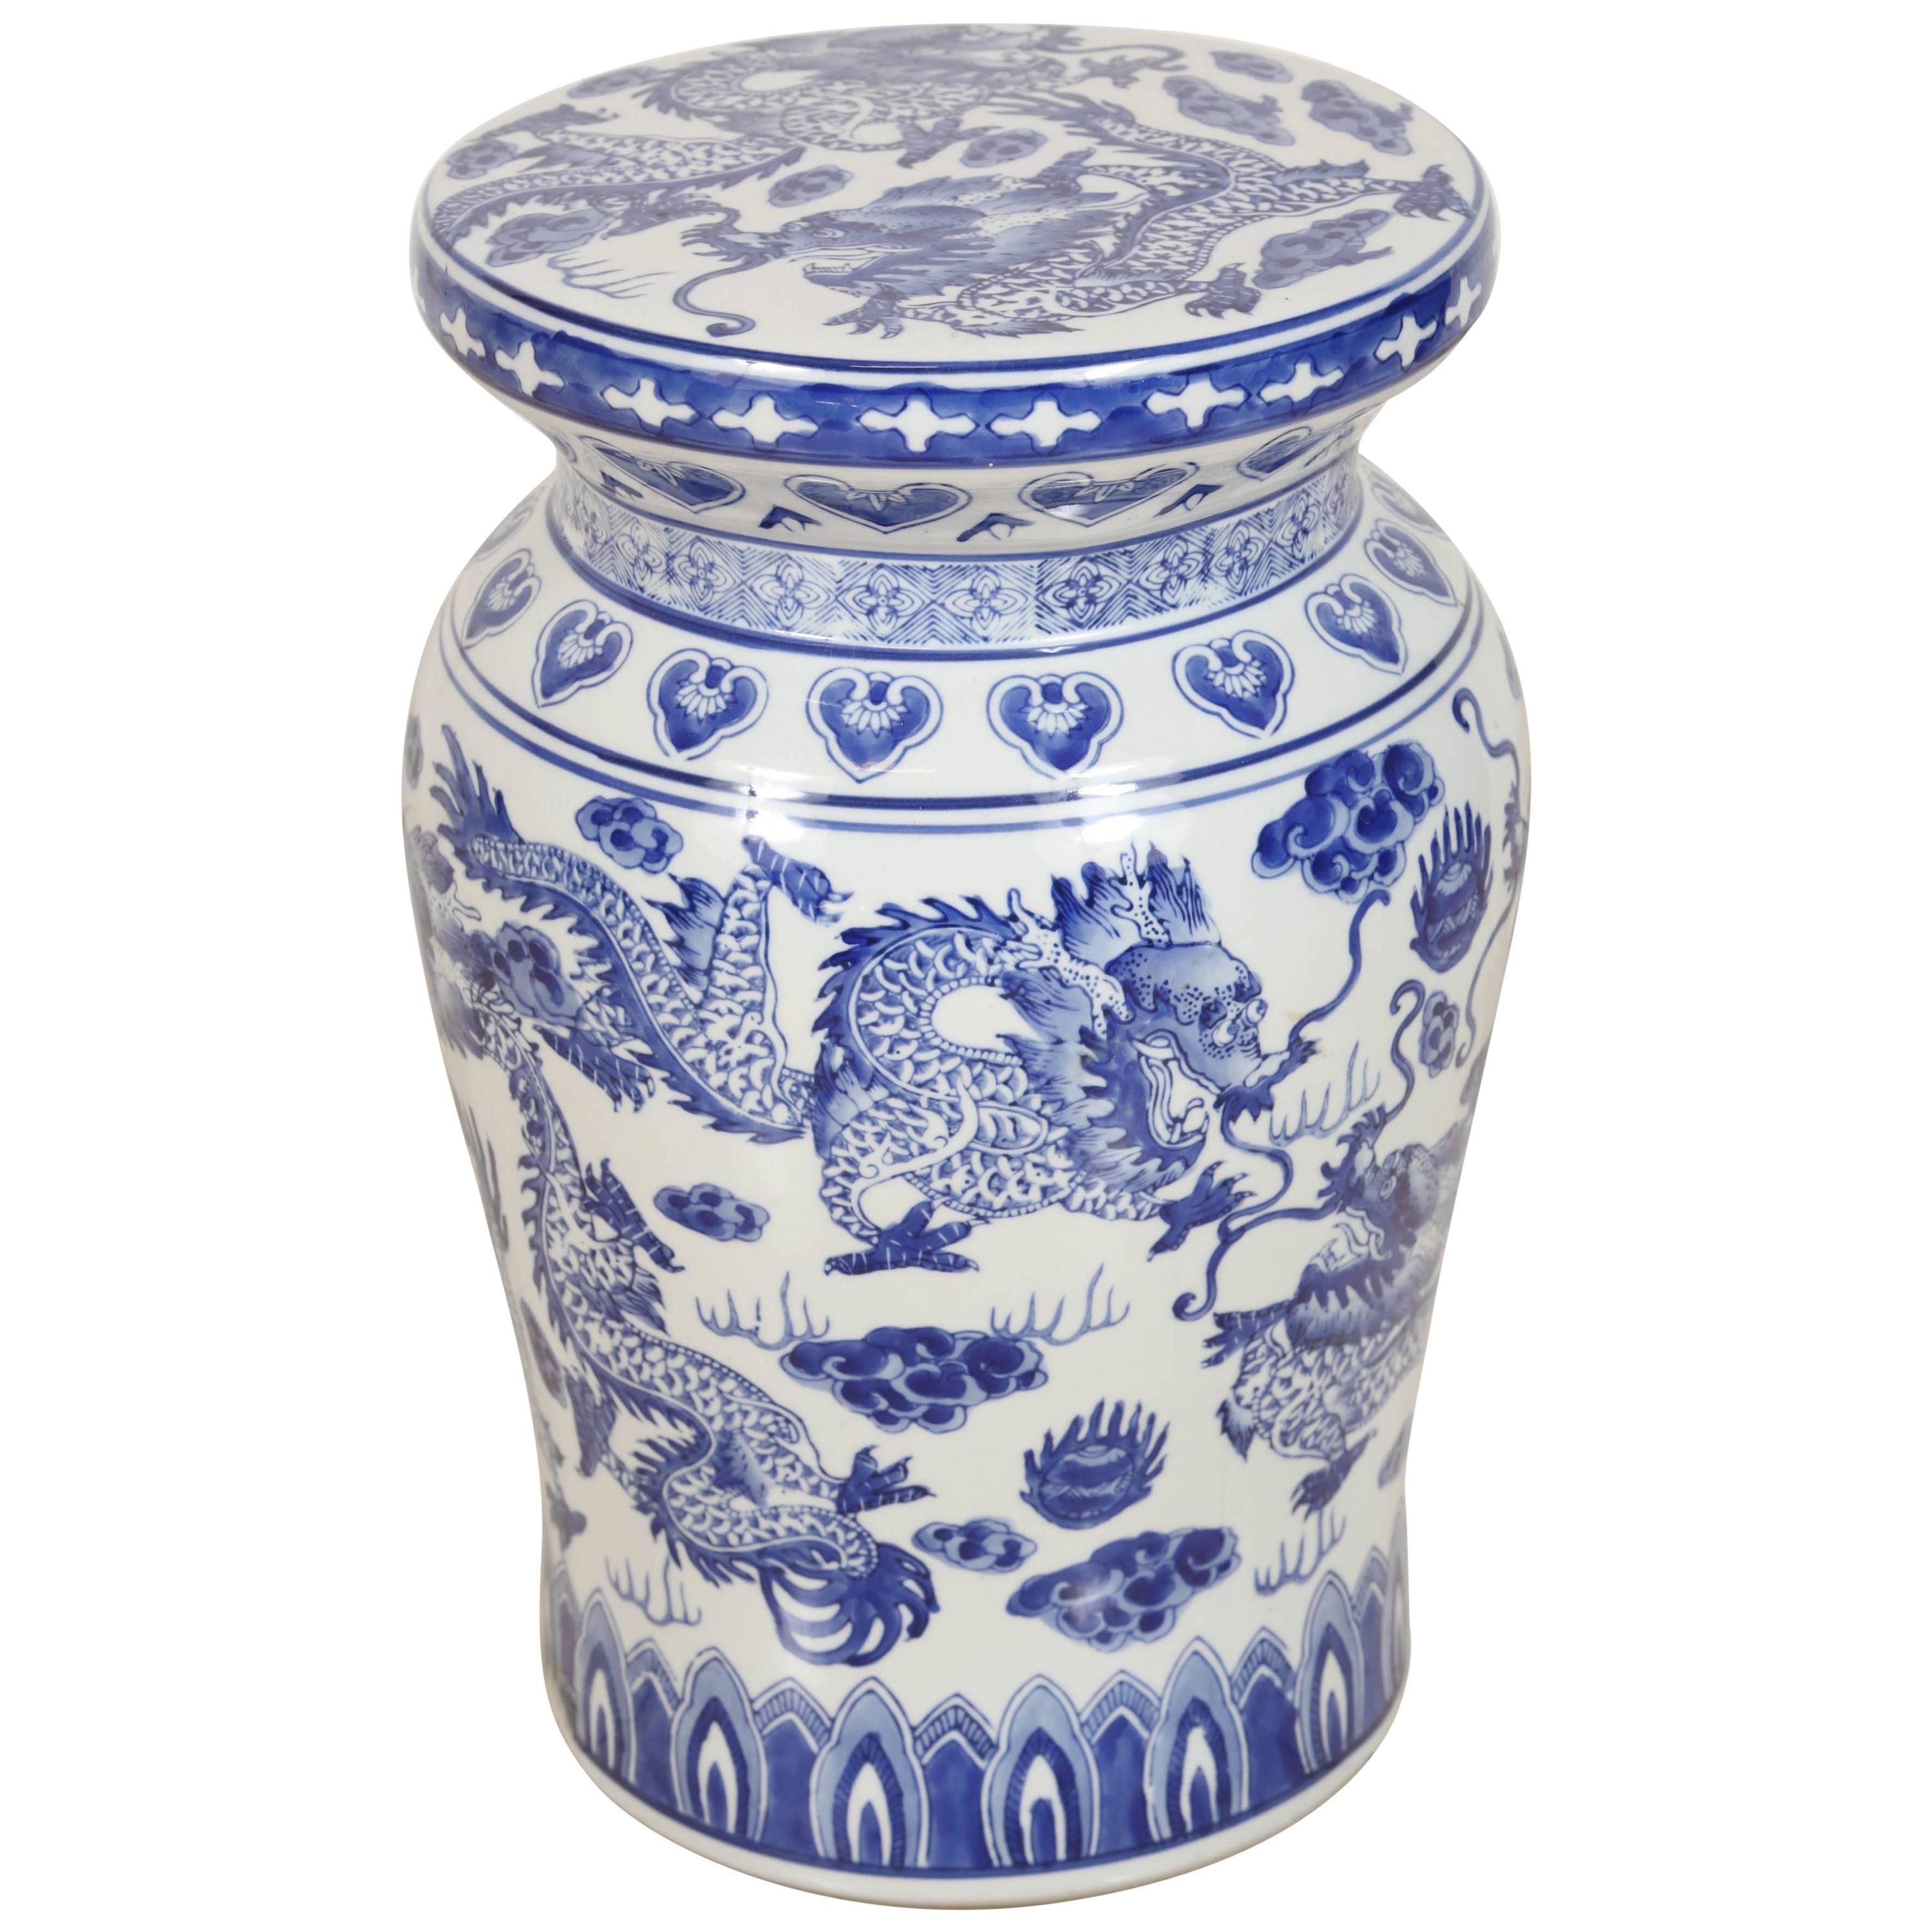 Chinese Porcelain Garden Seat in Blue And White Floral Motif